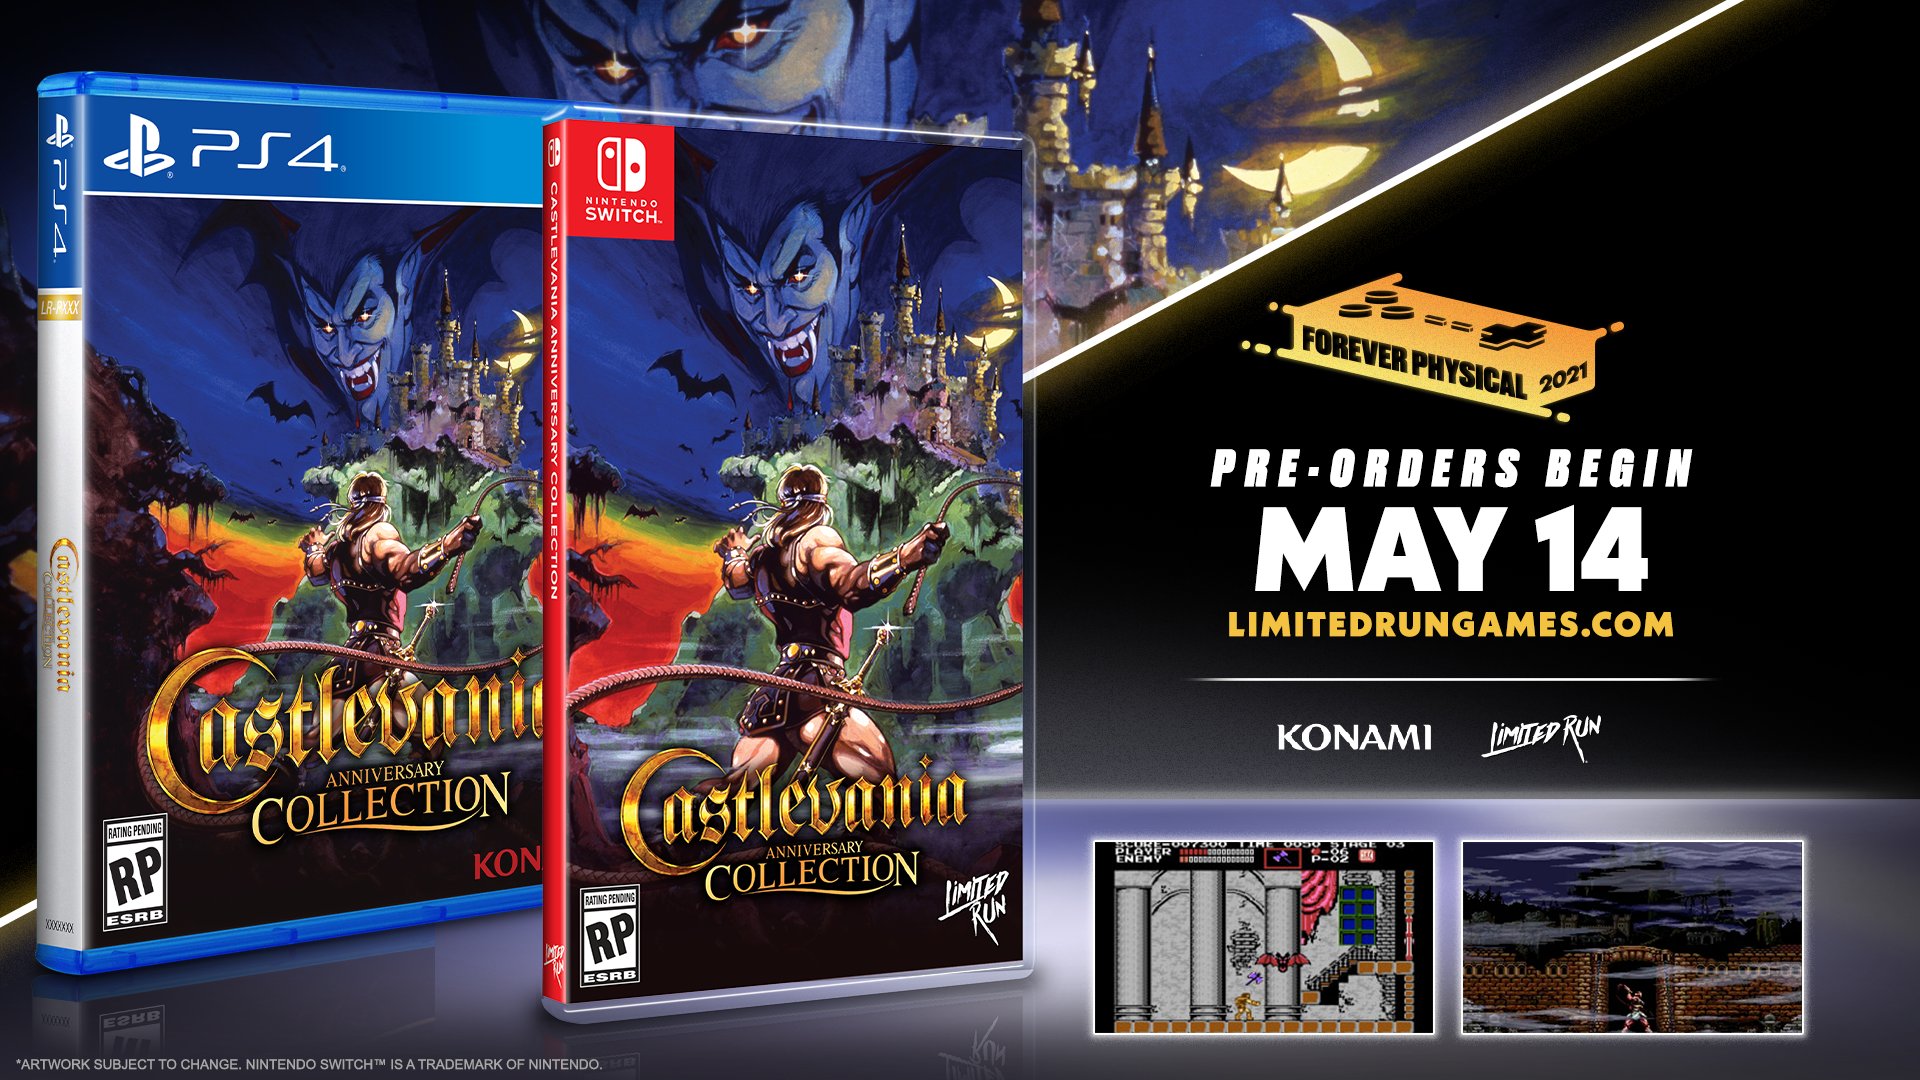 PS4＆Switch版『Castlevania: Anniversary Collection』のパッケージ版 